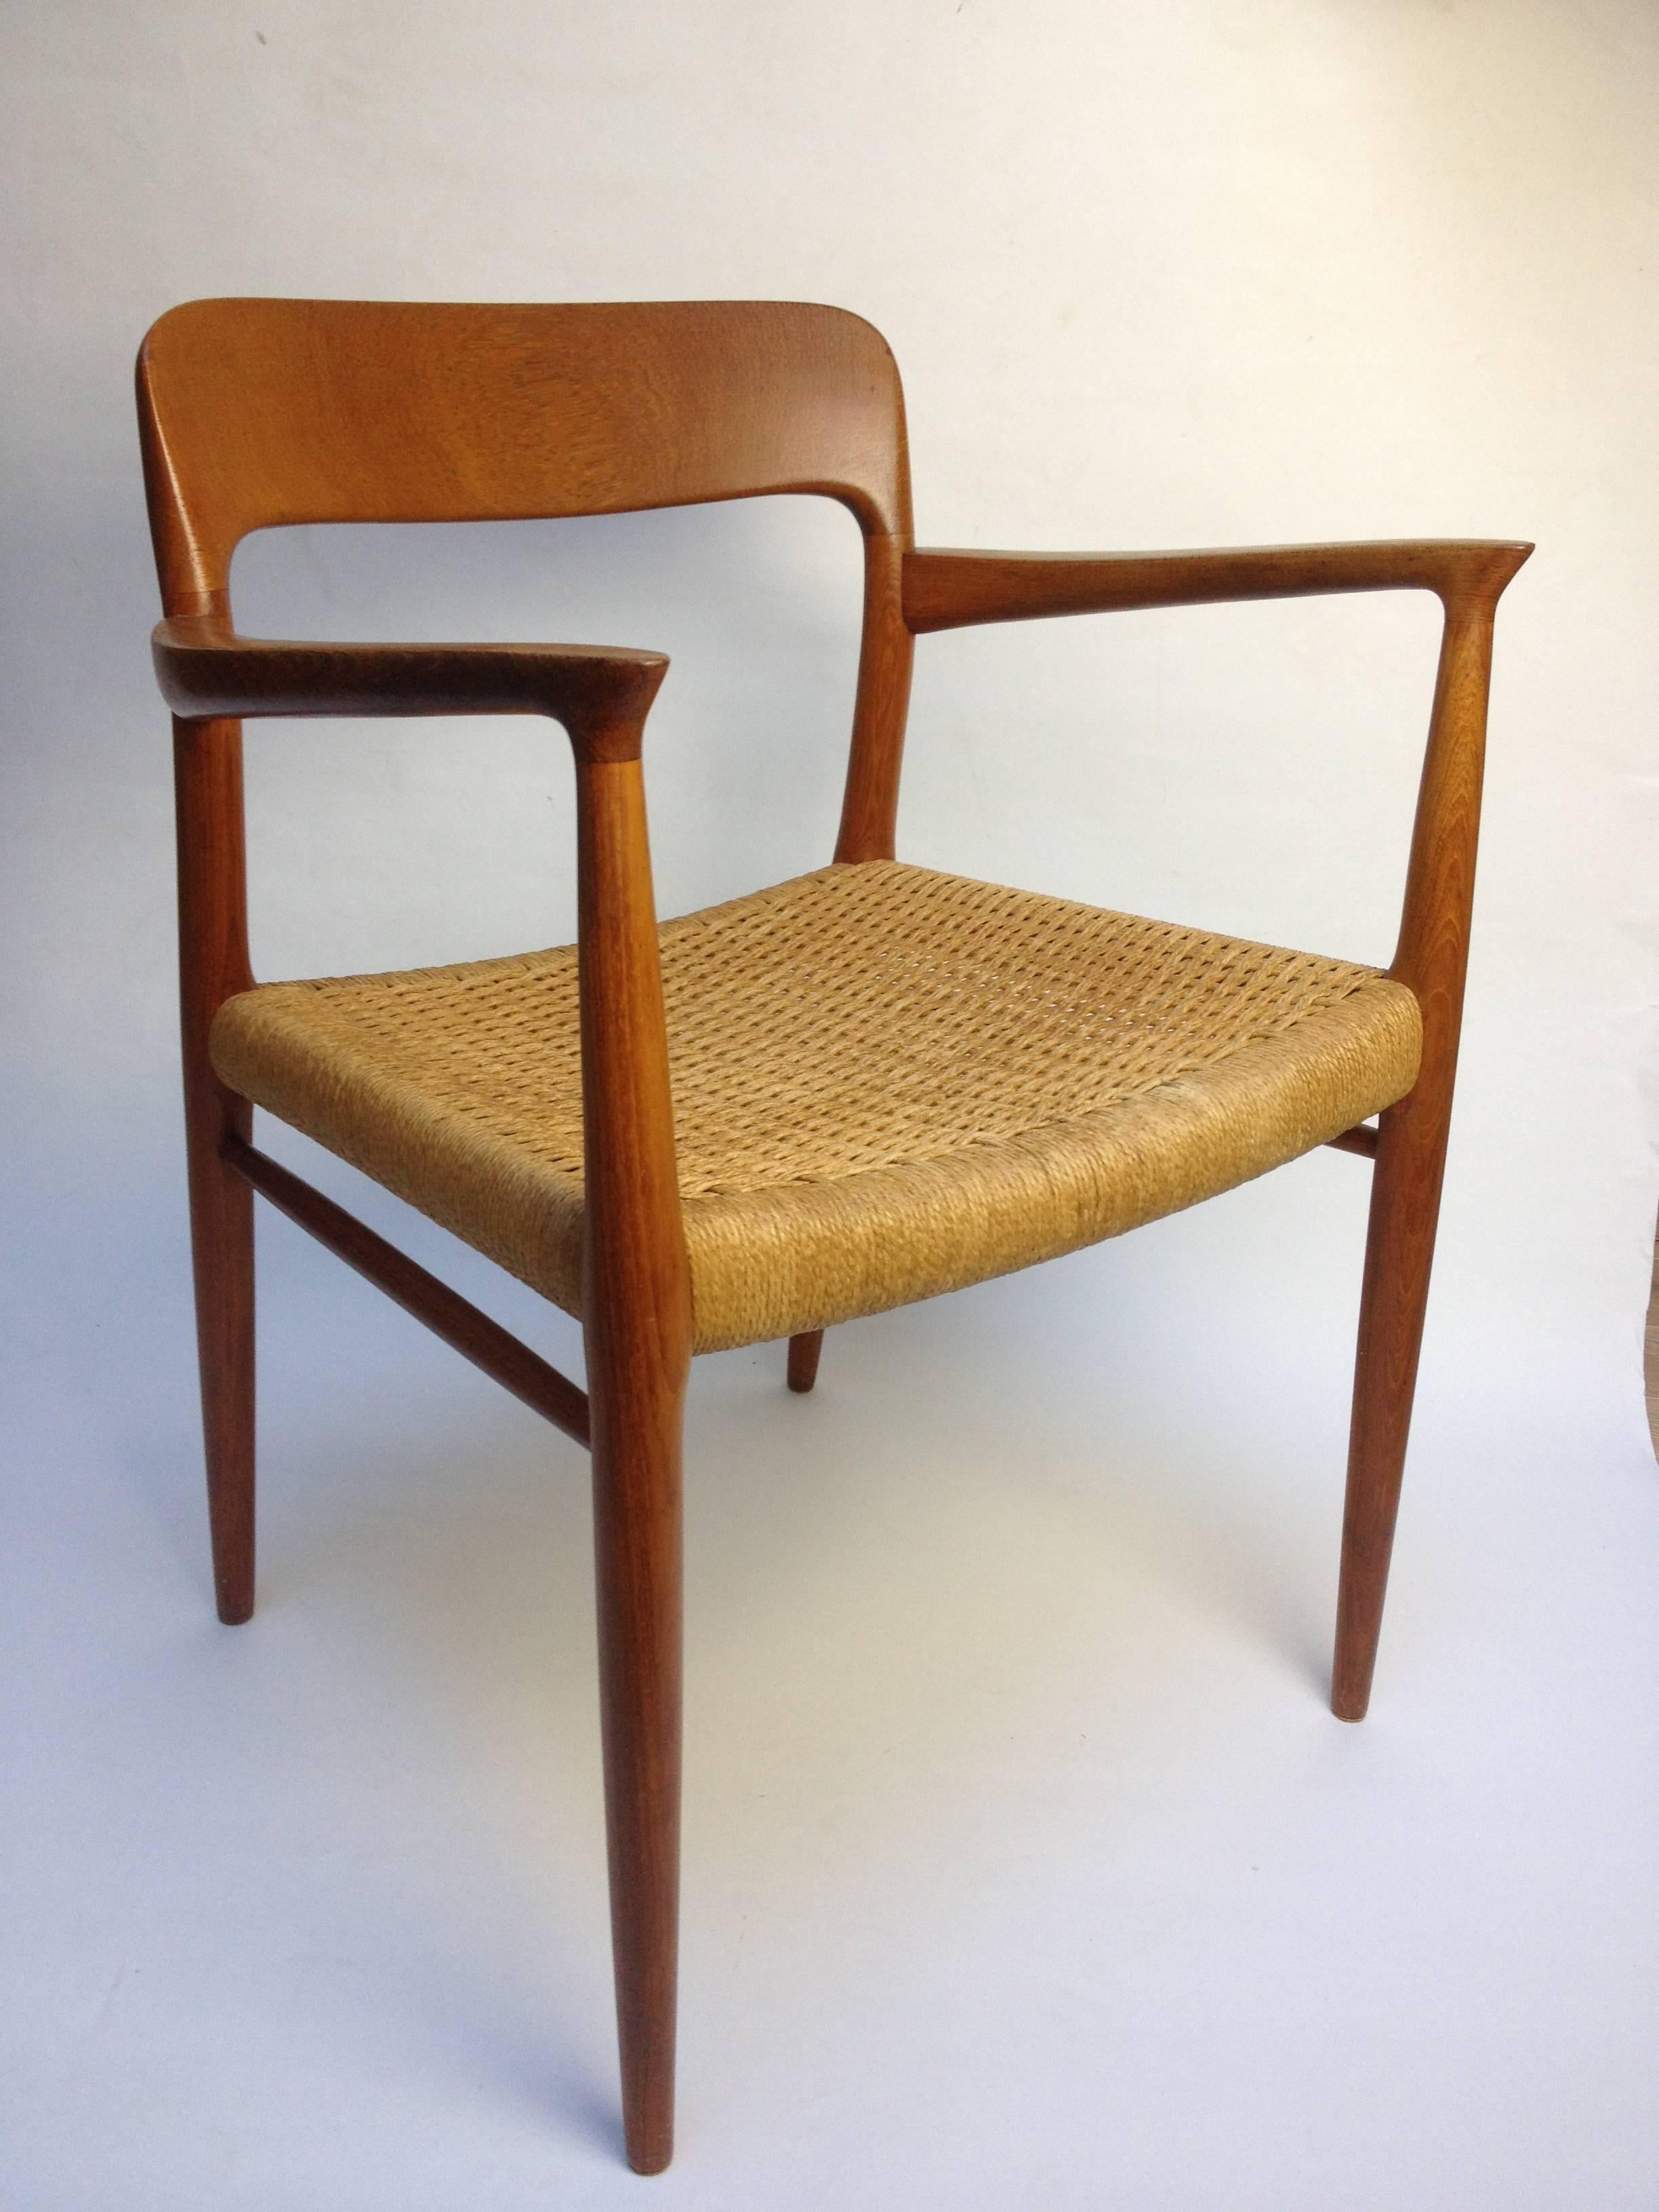 1960s Teak ArmChair, model 56, Designed by Niels Moller for J.L.Moller In Good Condition For Sale In Victoria, British Columbia